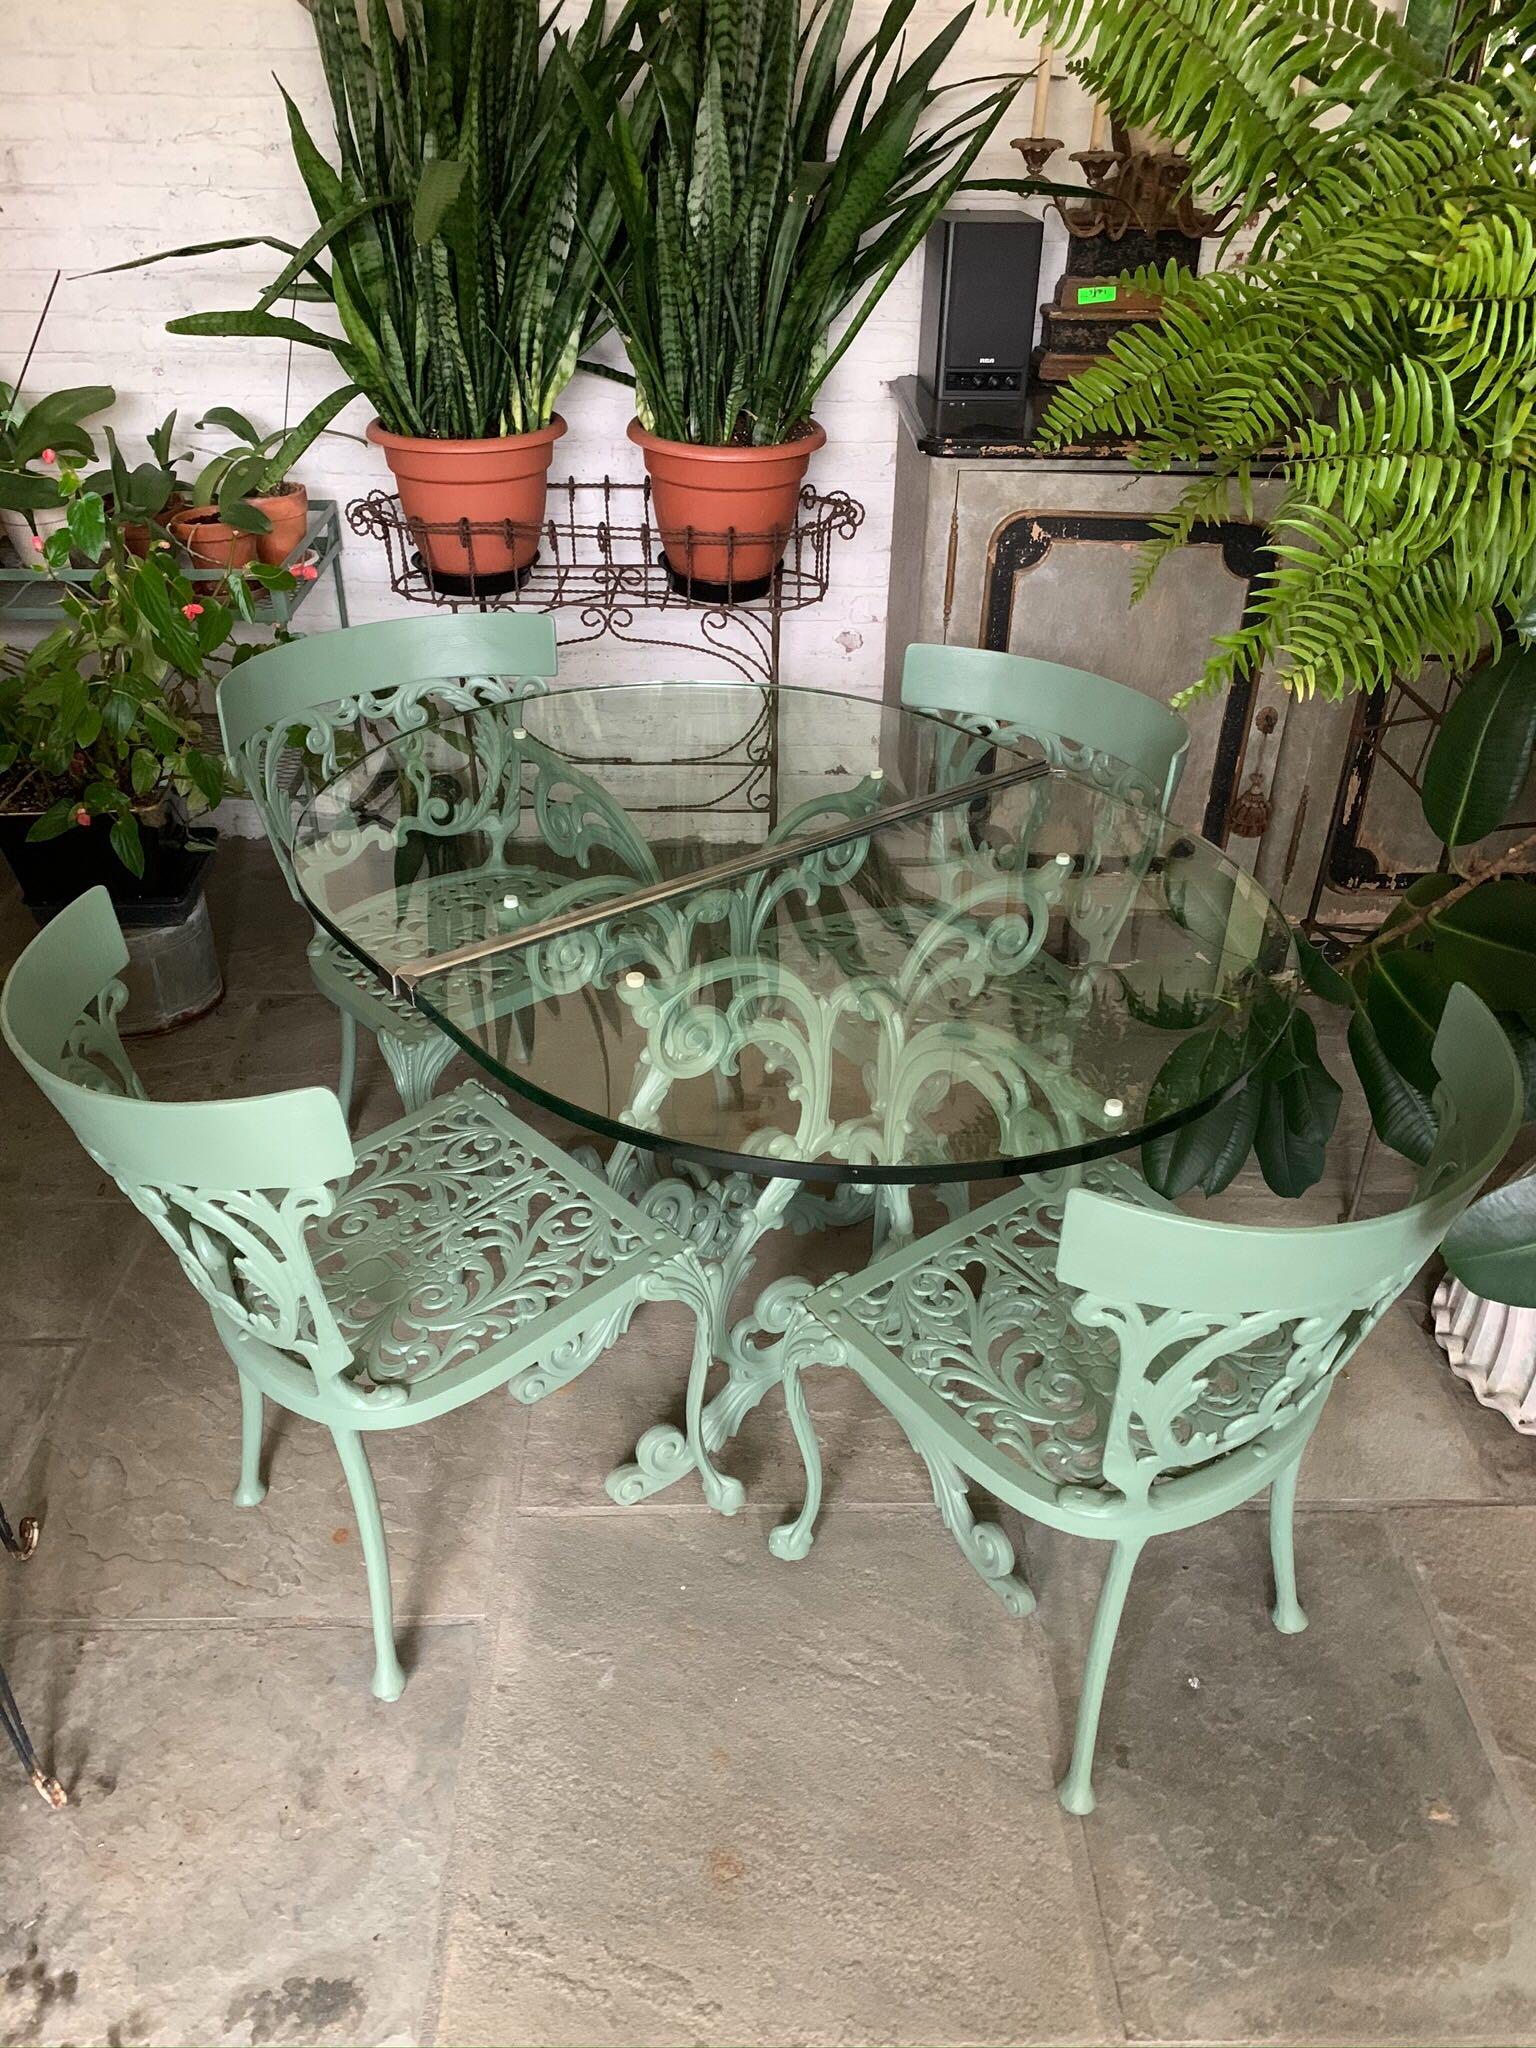 Neoclassical Revival Style Cast Iron Garden or Patio Furniture Chairs and Table 3